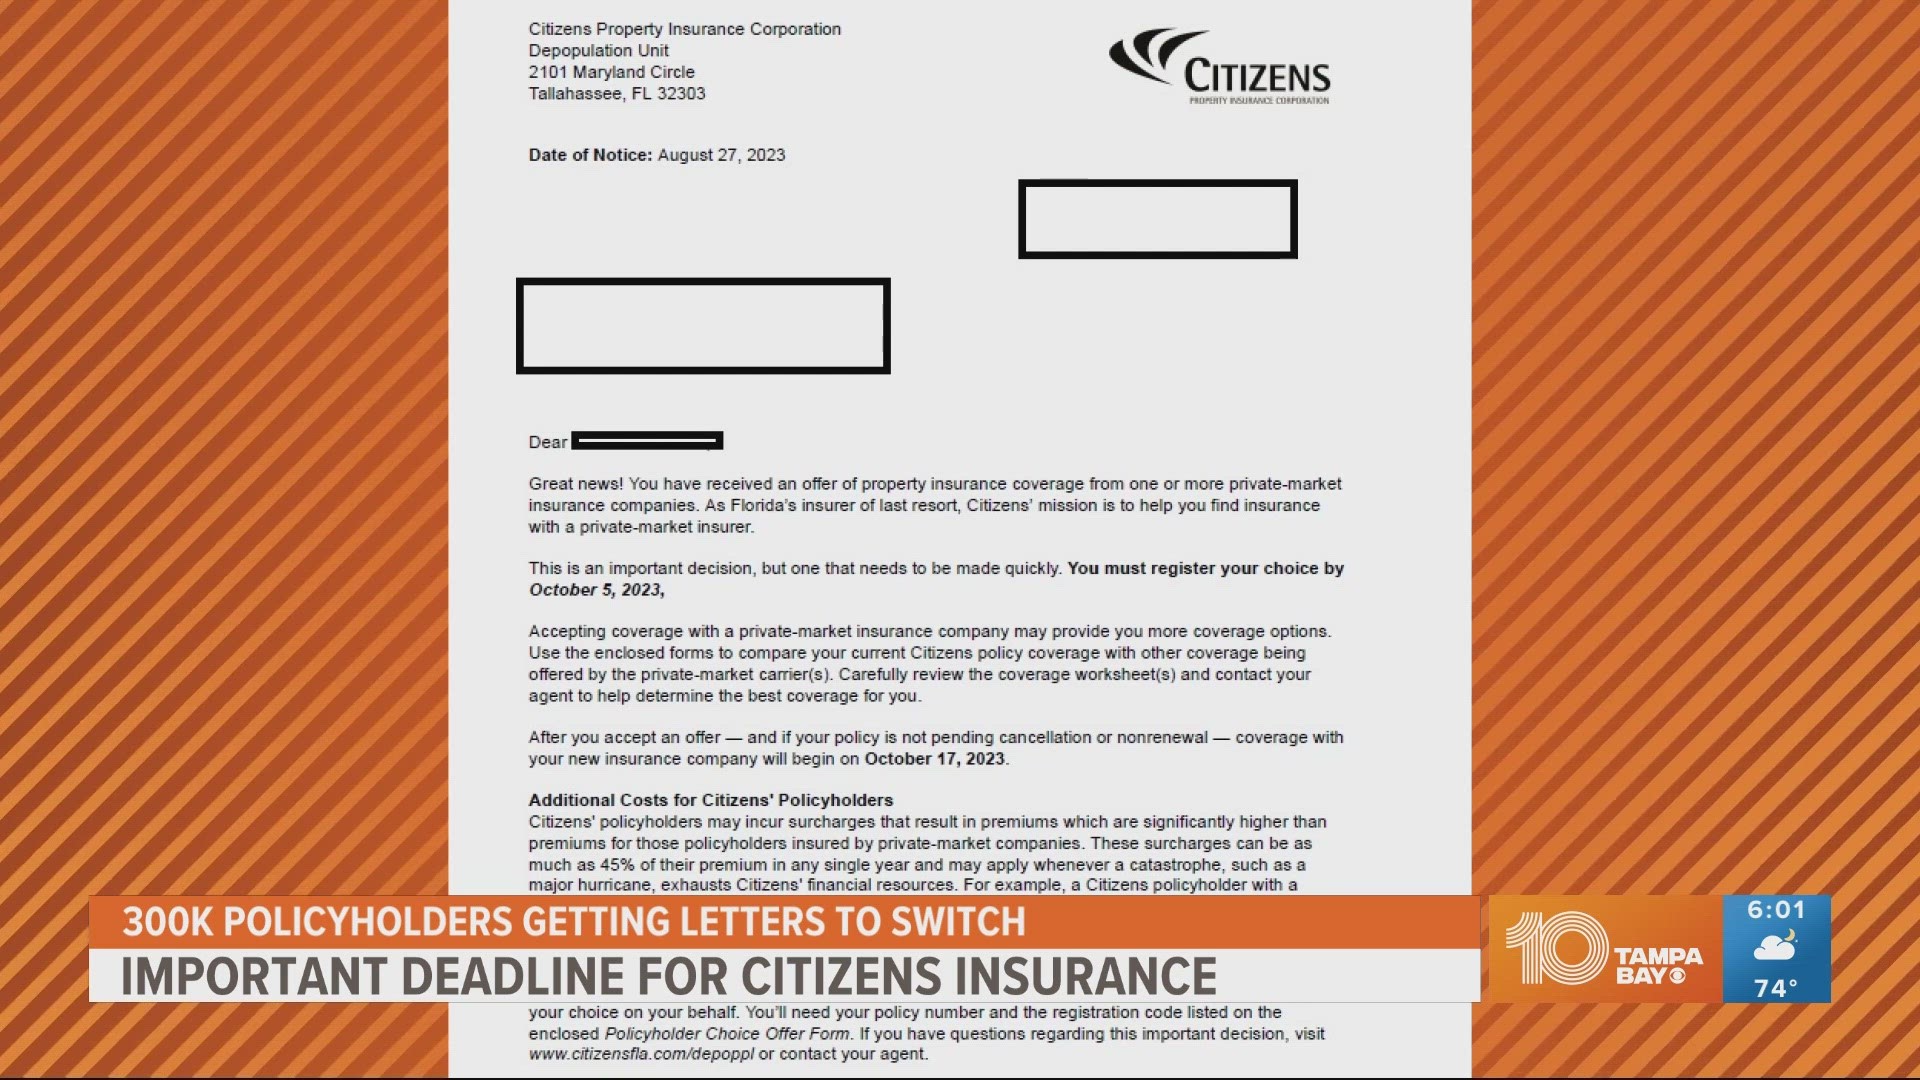 More than 300,000 people in Florida received letters letting them know they have to choose new homeowners insurance. Here's why it's important to act quickly.